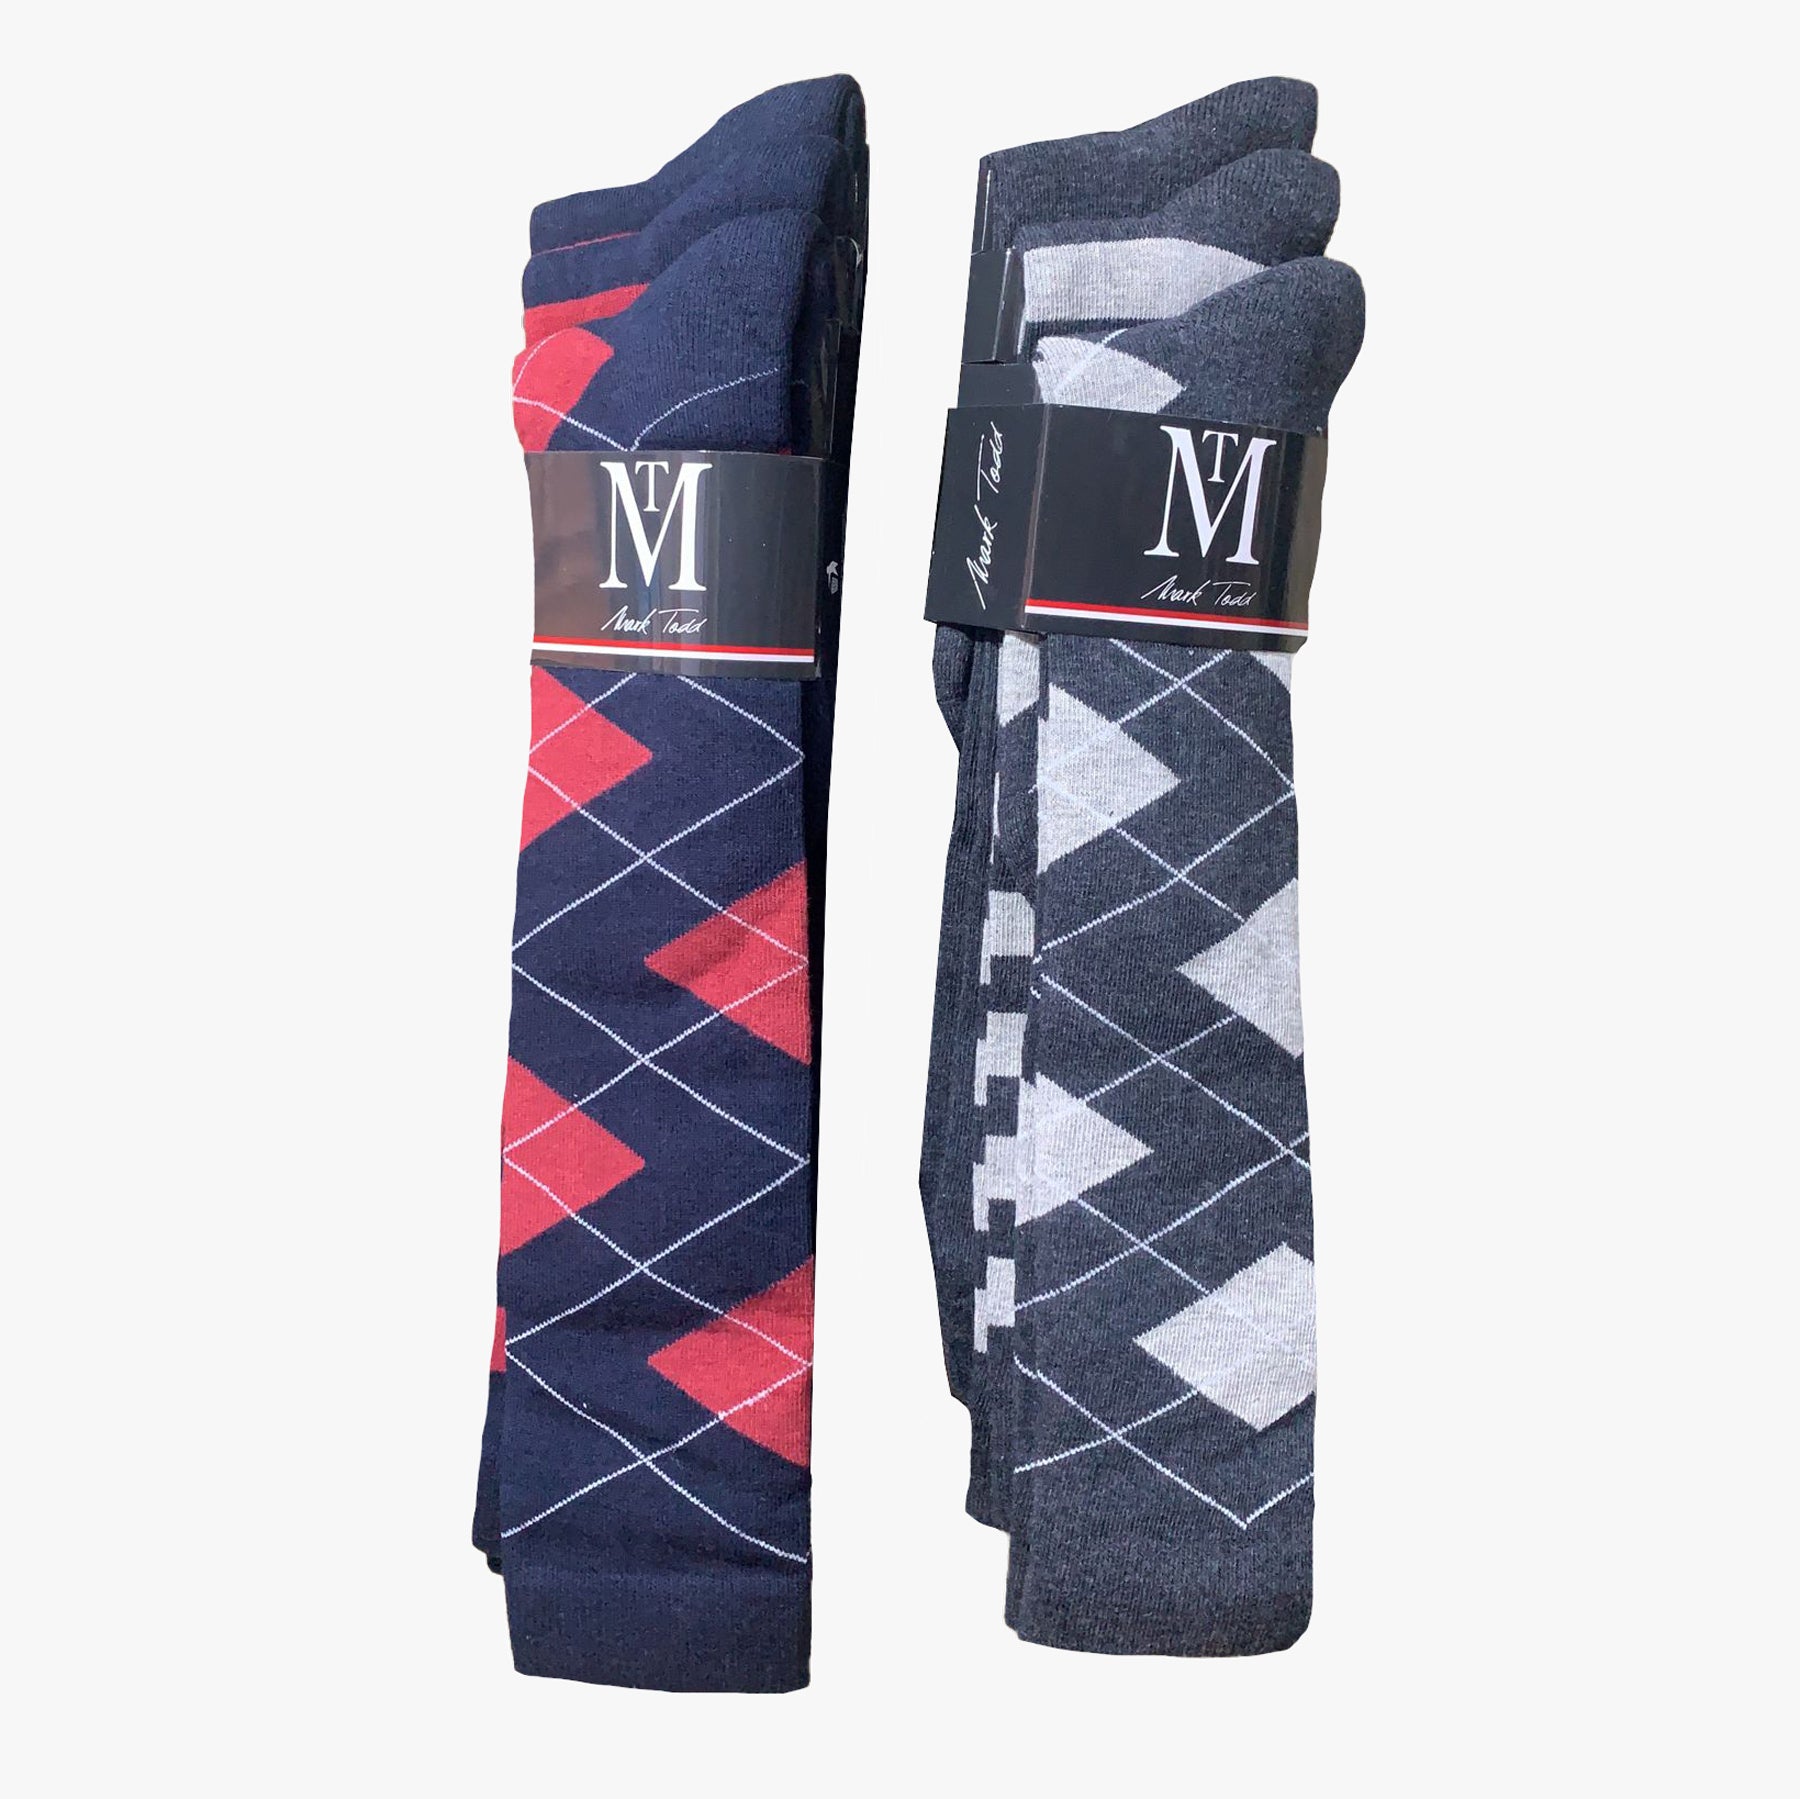 Mark Todd long riding socks in navy/red and grey/white